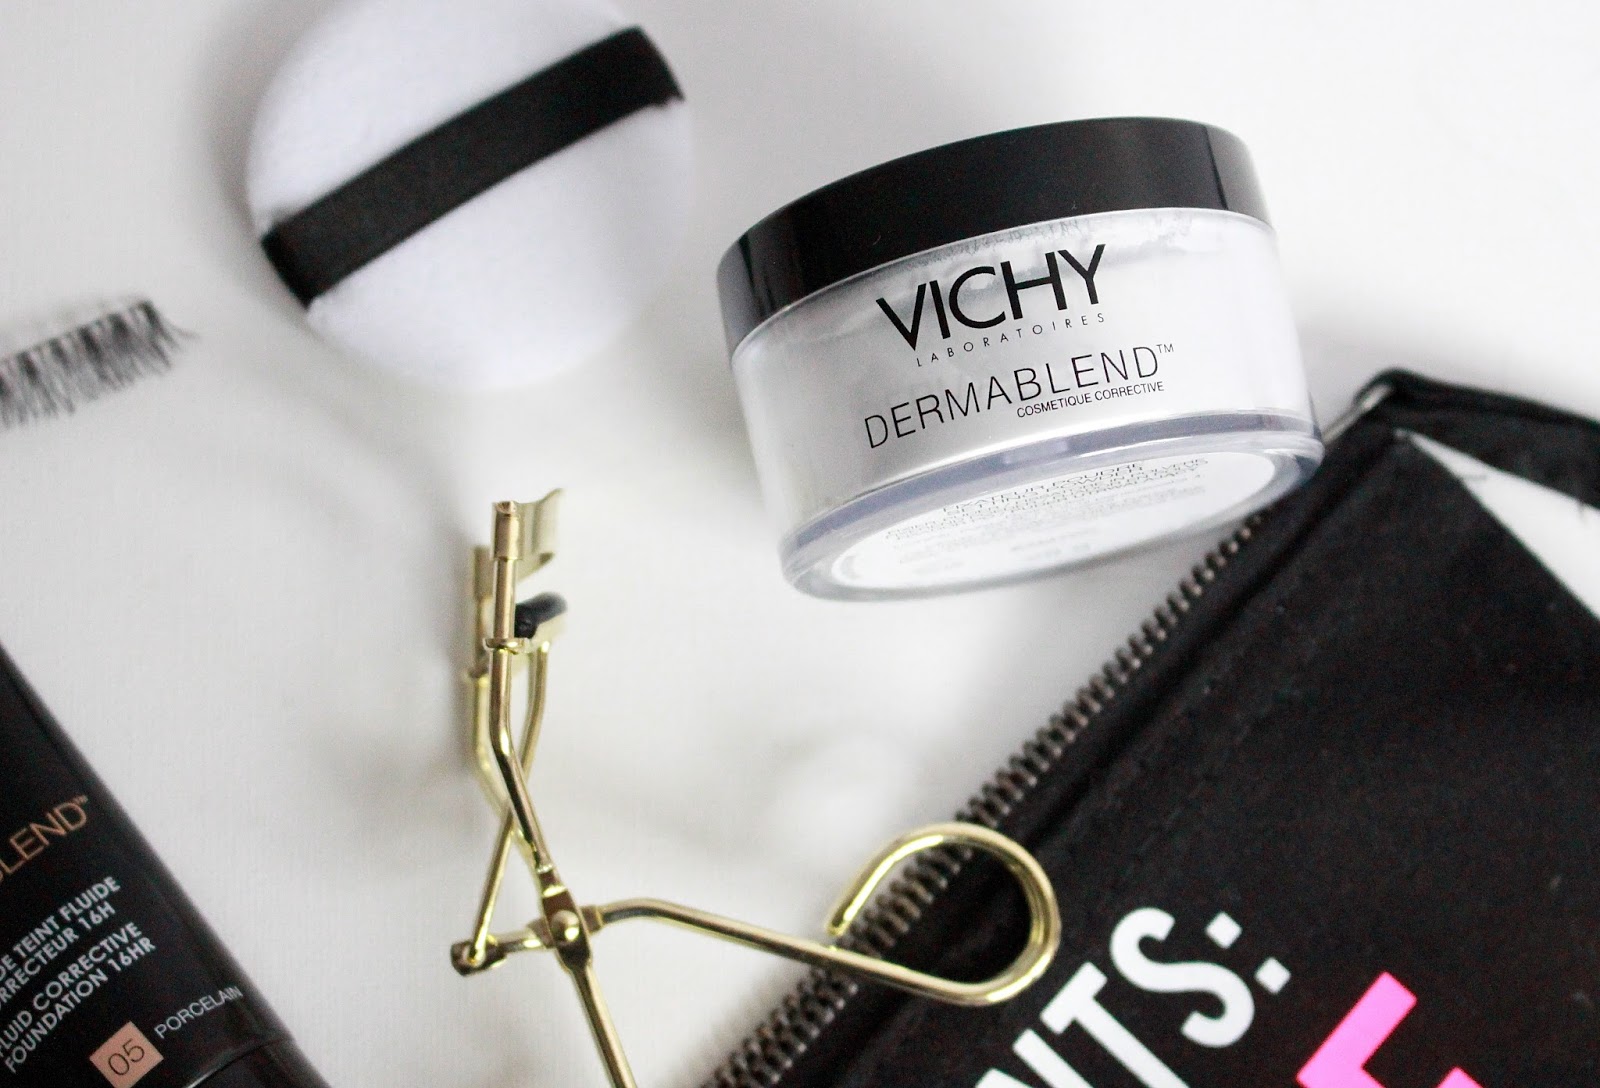 Vichy Dermablend, Loreal Foundation Review, Dermablend Review, Blogger Mail, Flatlay,Vichy setting Powder Review